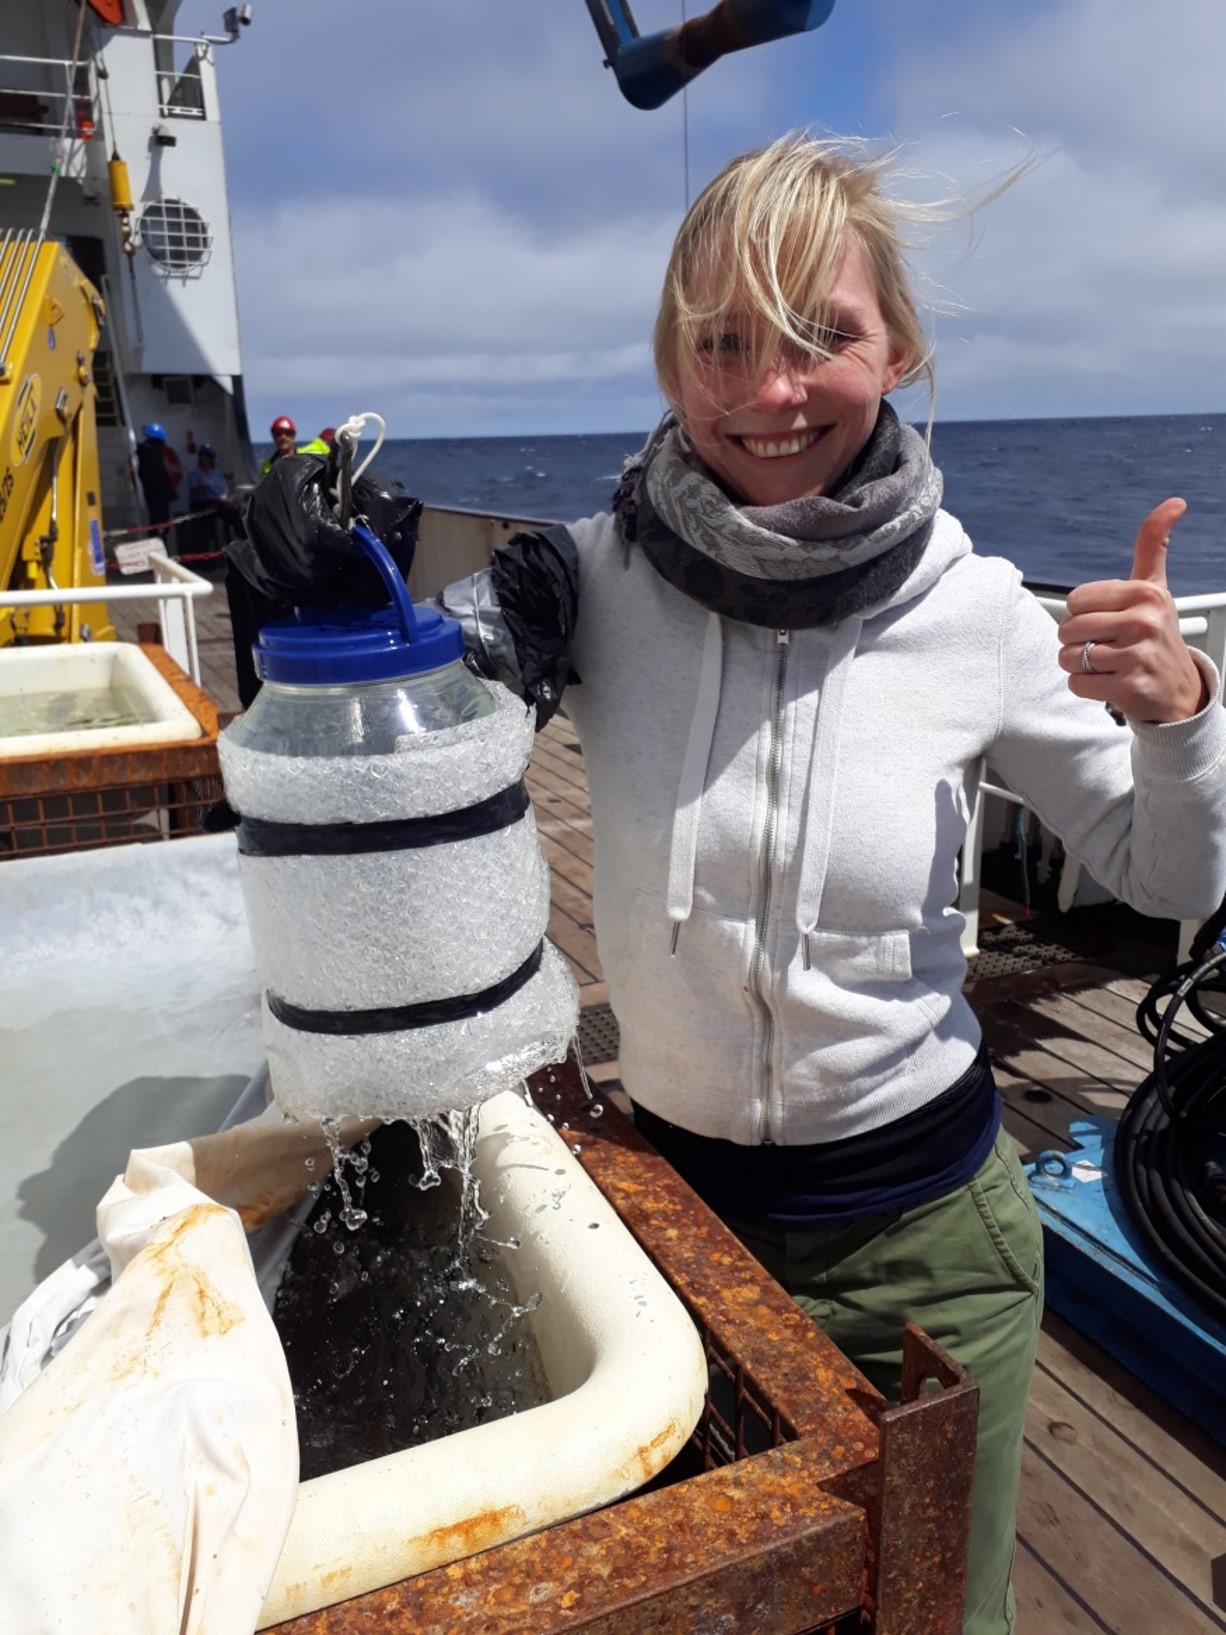 Lisette Mekkes during her PhD research to sea butterflies at research vessel “Discovery” in the Southern Ocean. Credits: Katja Peijnenburg, Naturalis Biodiversity Center.